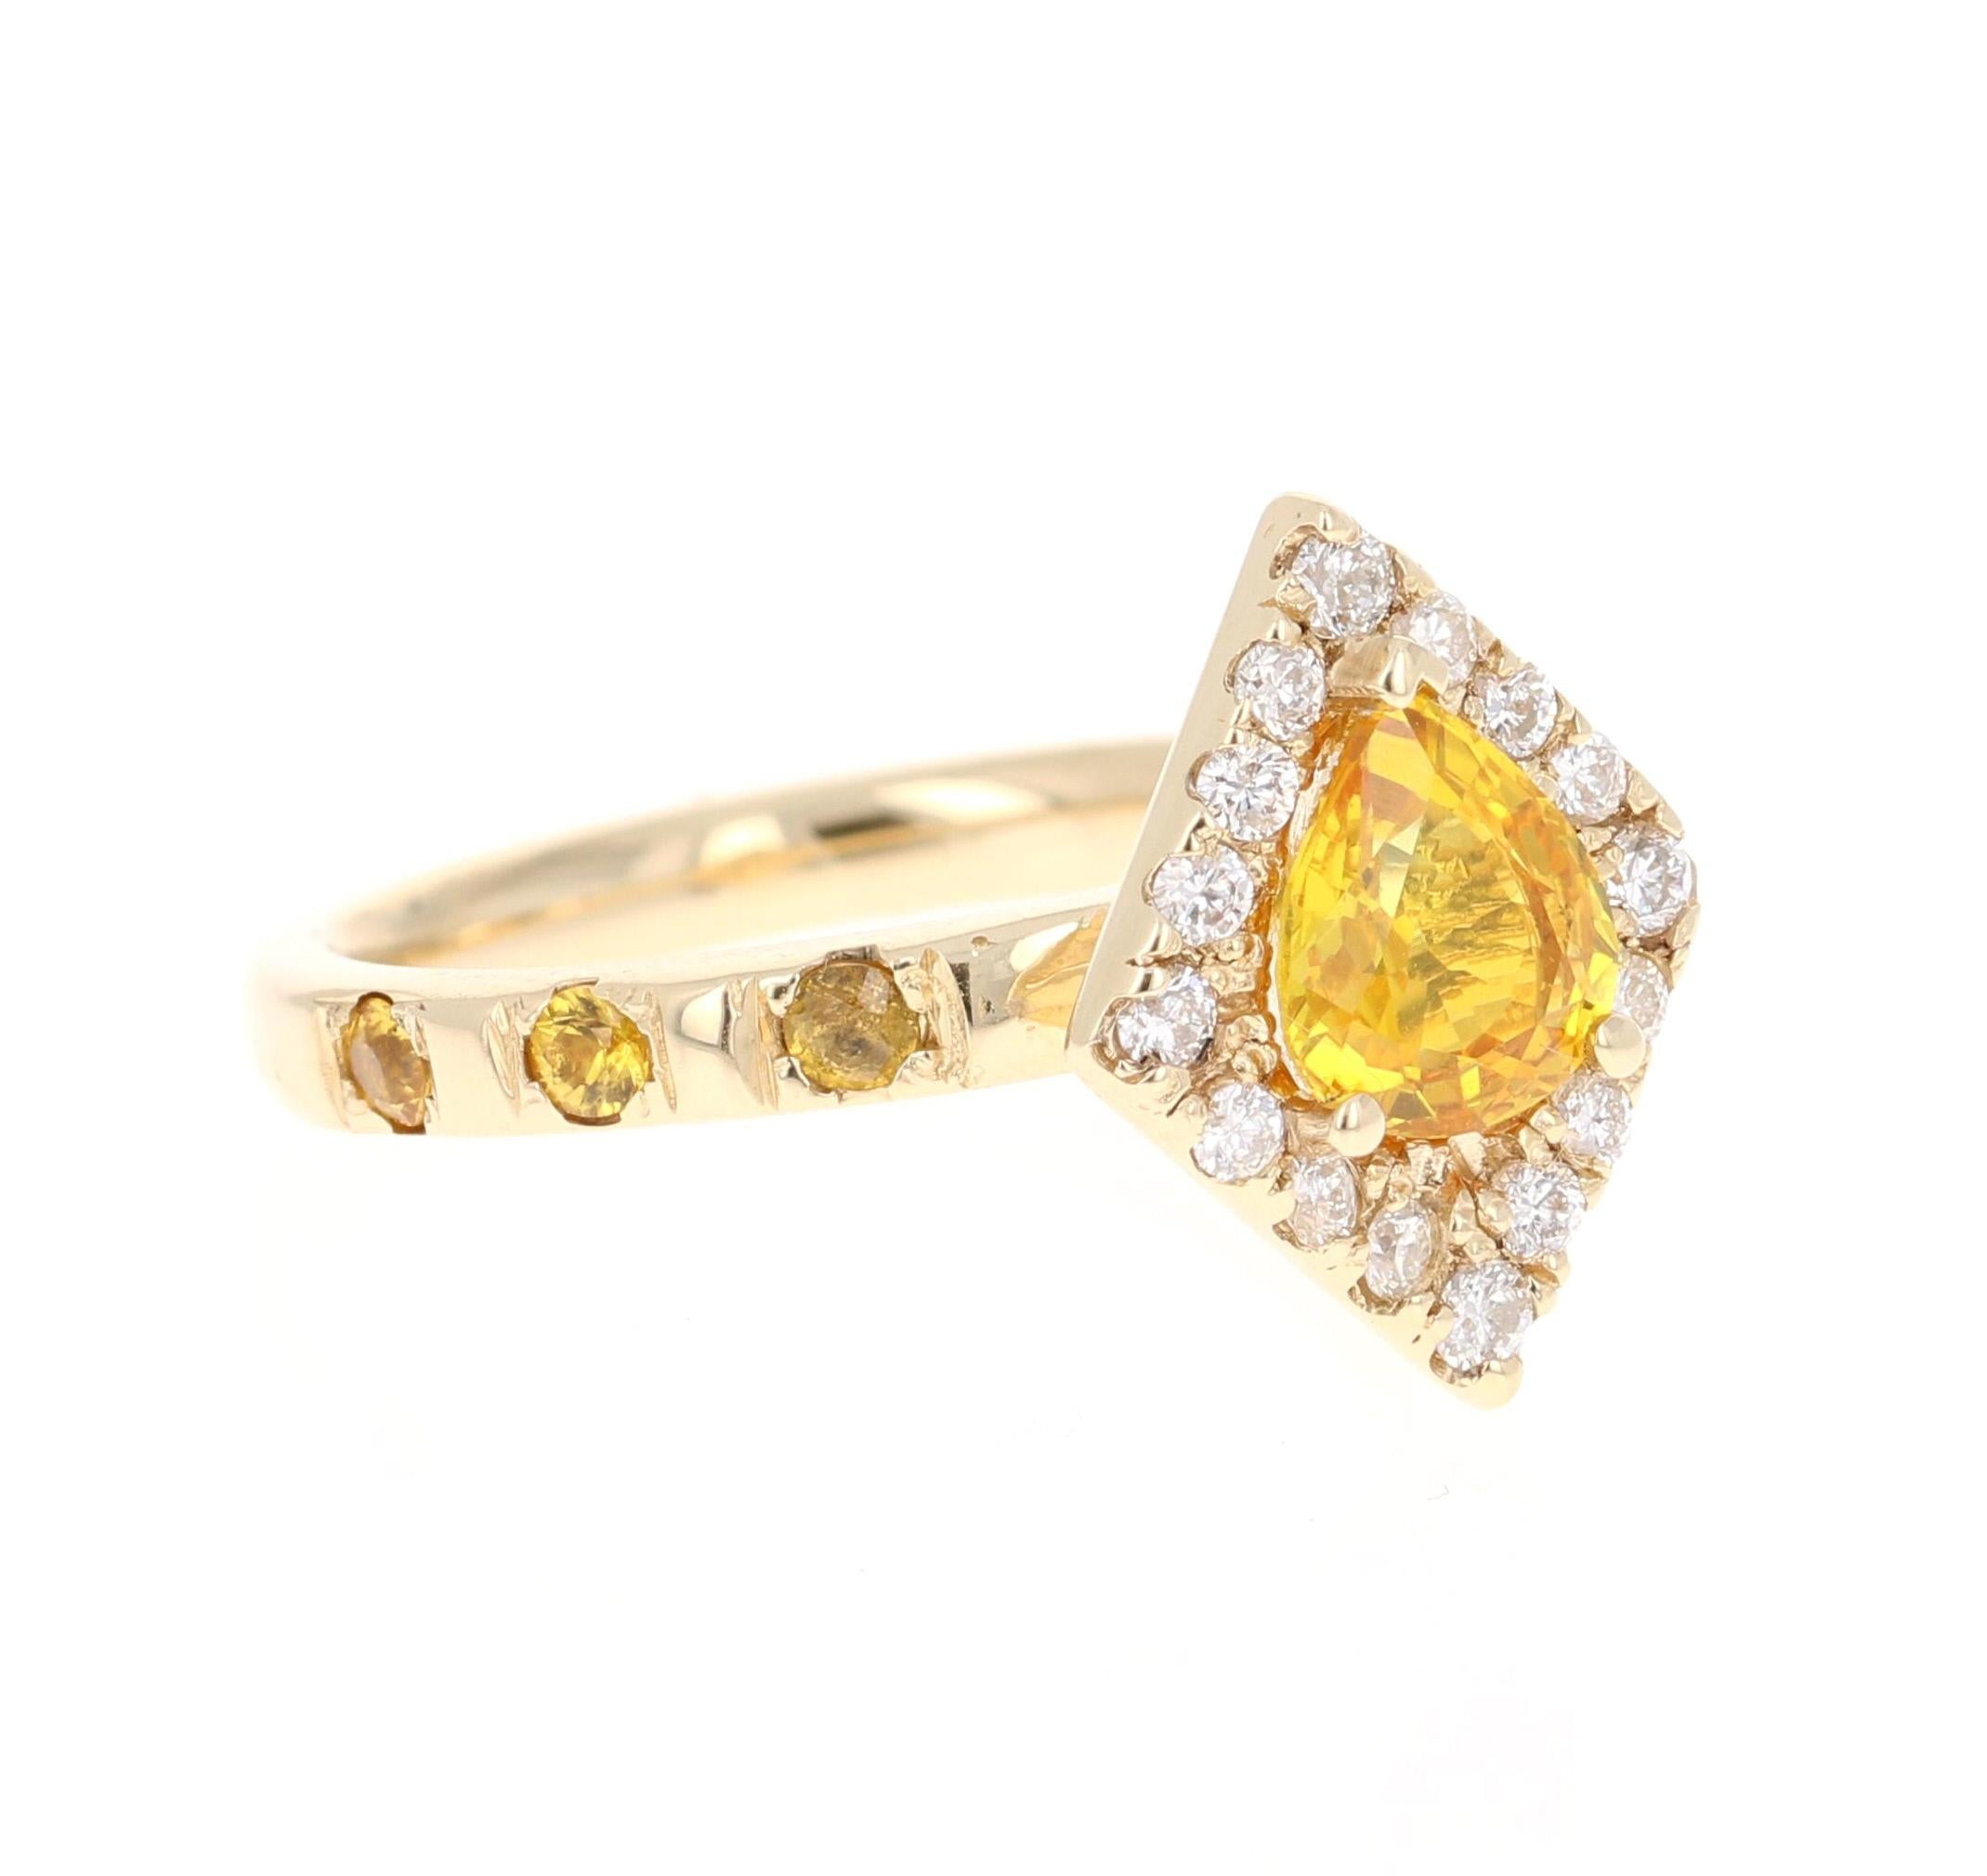 This beautiful ring has a Pear Cut Yellow Sapphire that weighs 1.34 Carats and also has 16 Round Cut Diamonds that weigh 0.32 Carats, it is further embellished with 6 Yellow Sapphires on the shank weighing 0.35 Carats. The total carat weight of the